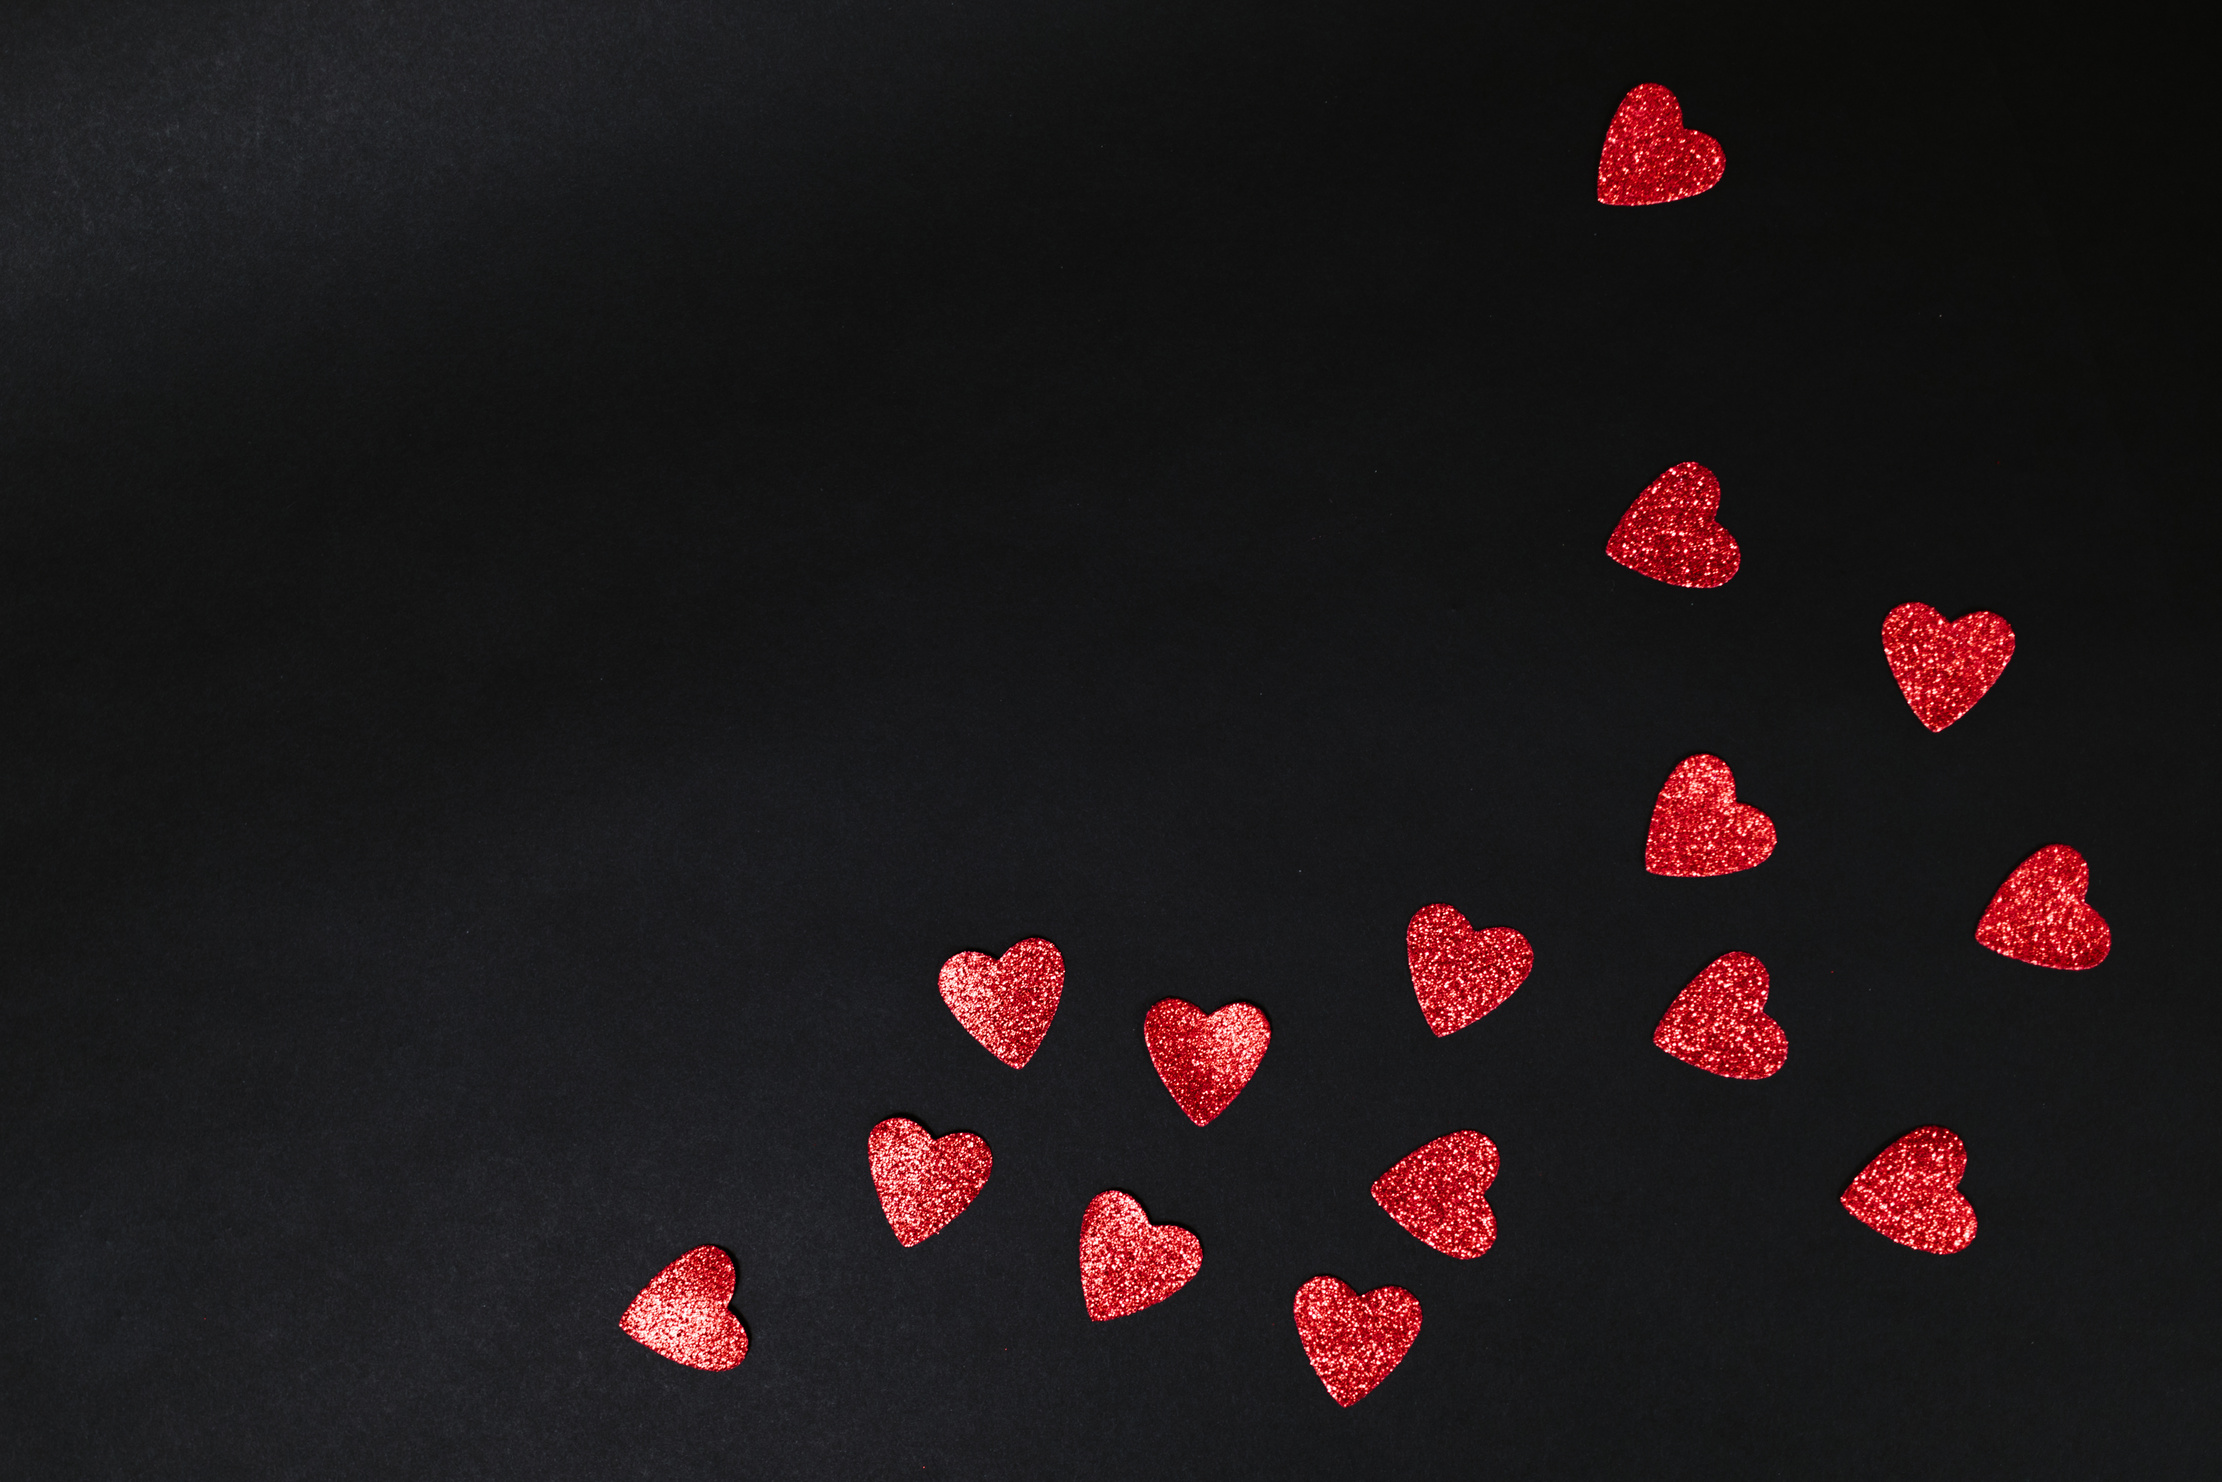 Red Hearts on Black Textile